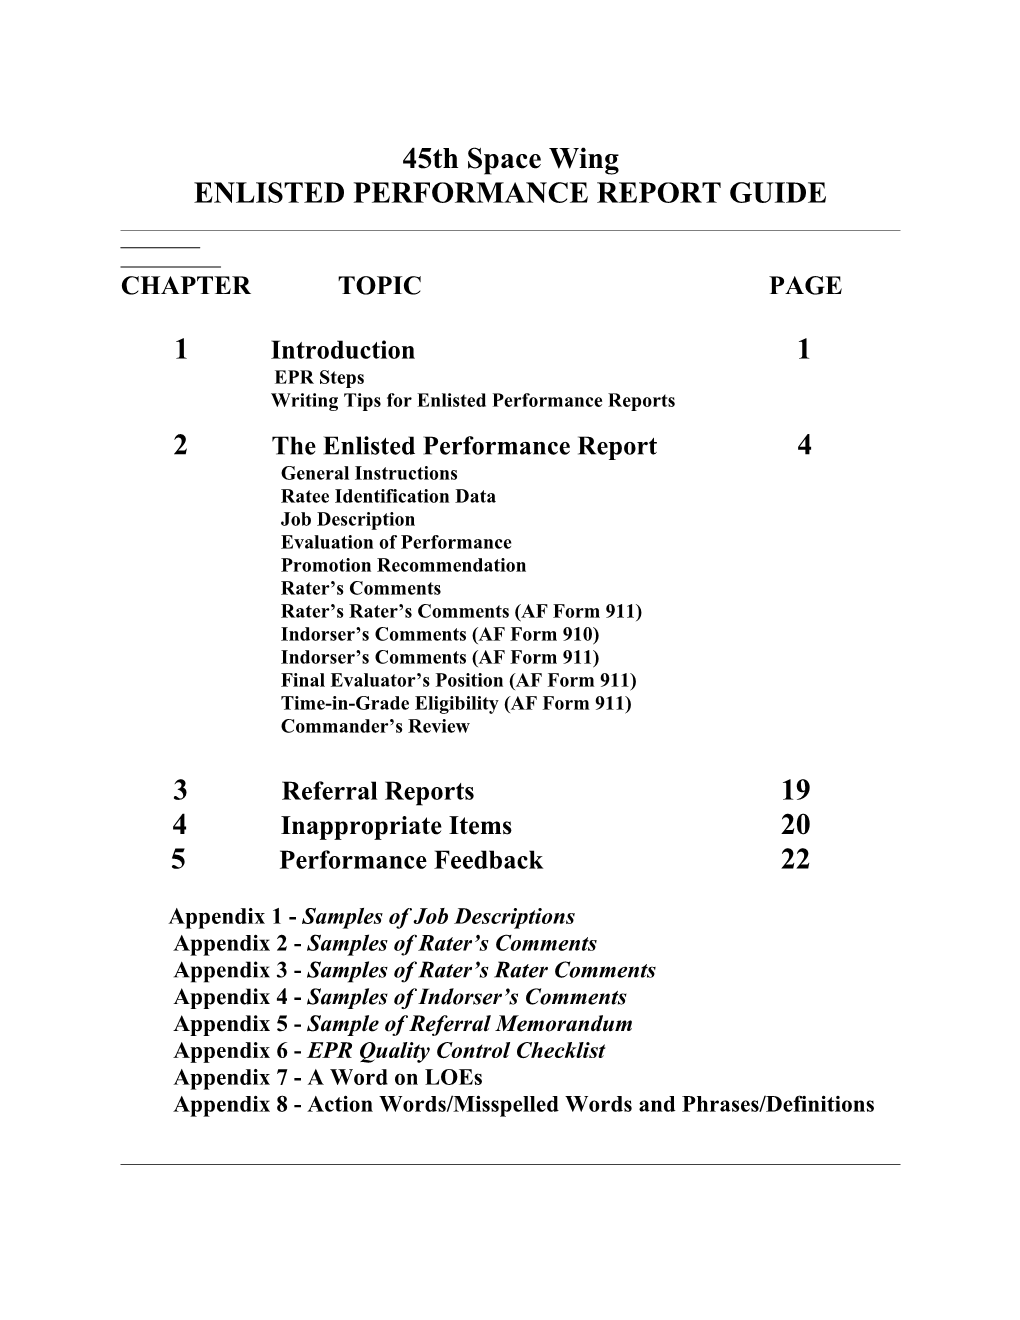 45Sw Enlisted Performance Report Guide